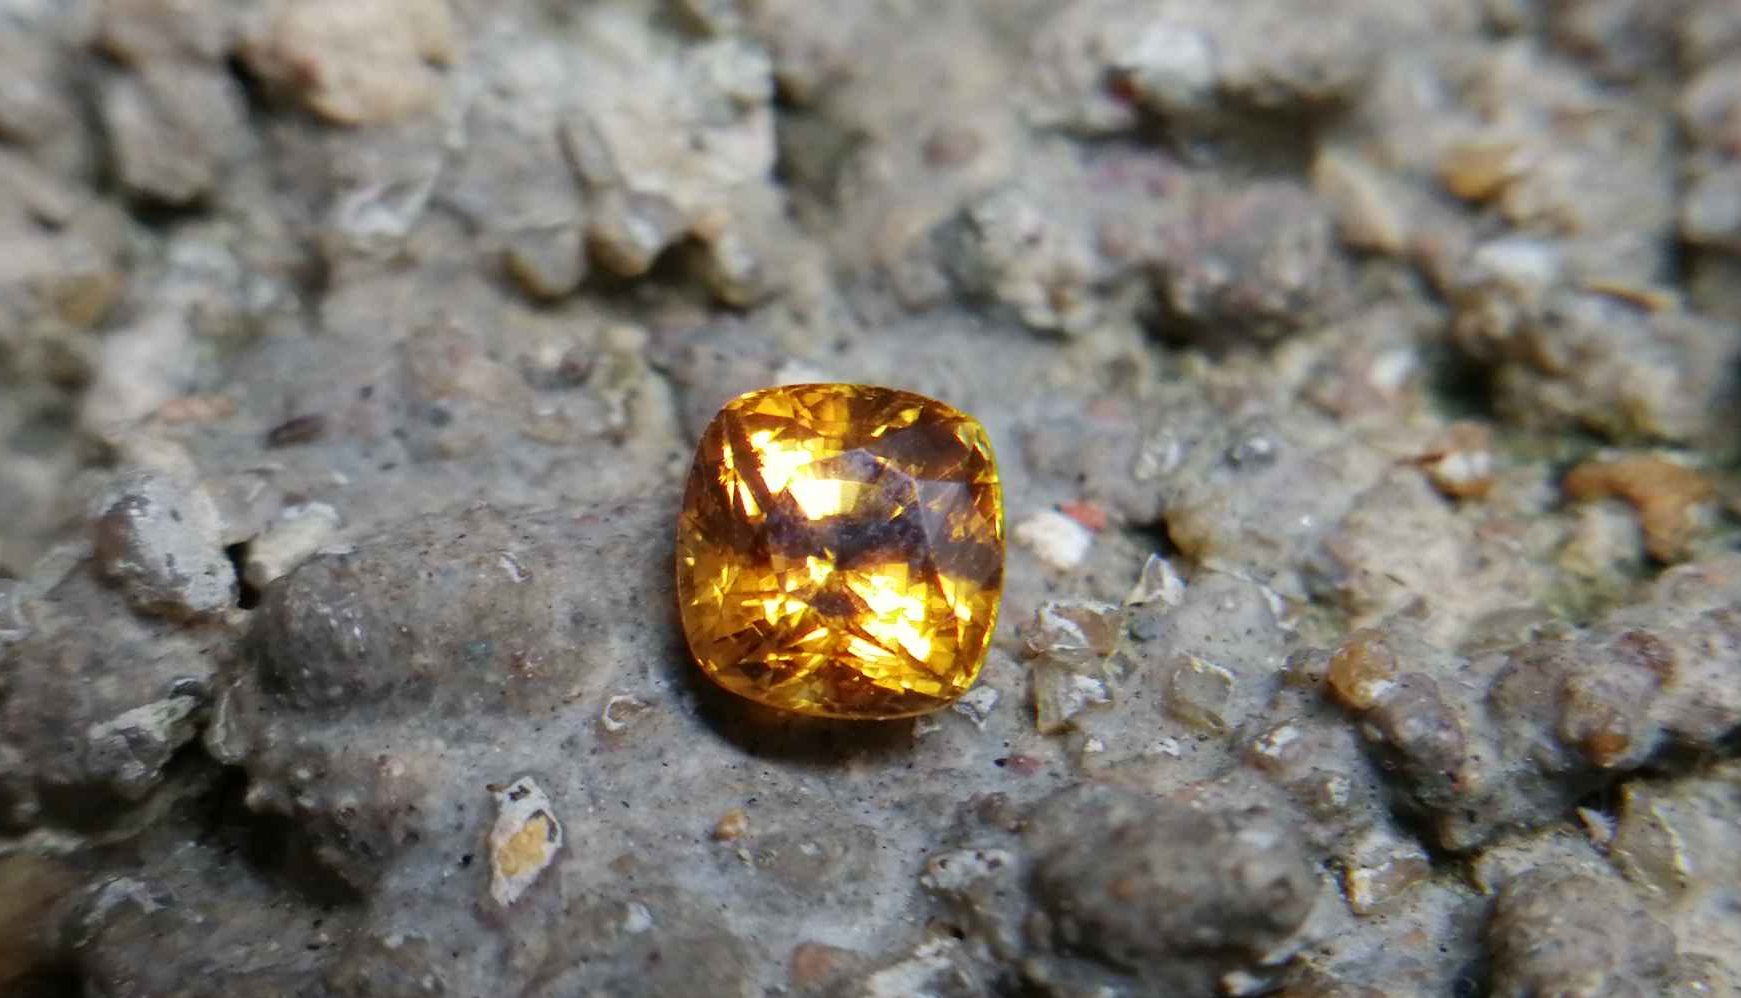 Ceylon Natural Yellow Sapphire 黃色的藍寶石 Sapphire is a precious gemstone, a variety of the mineral corundum, consisting of aluminium oxide with trace amounts of elements such as iron, titanium, chromium, copper, or magnesium. Sapphire helps the user stay on the Spiritual Path, boosting psychic and spiritual powers, and is a great stone for Earth and Chakra healing. also, all corundums share some energies in common, the various colours of Sapphire have individual vibrational signatures and different spiritual properties. Sapphire was used by the Etruscans over 2,500 years ago and was also prized in ancient Rome, Greece and Egypt. Revered as a stone of royalty, sapphire was believed to keep kings safe from harm or envy. It is one of the most recognized gemstones in vedic astrology worn for professional success, marital bliss, improved will power and healthy progeny. It is believed to hold the powers of the planet Jupiter. Jupiter is the heaviest planet in the solar system, hence imparting distinctive powers to Yellow Sapphire over other precious stones. It is known for providing healing powers in the ailments of the kidneys, mouth, rheumatism, cough and fever. Yellow Sapphires are worn in the Index finger of the correct hand on a Thursday morning of the Shukla Paksha (waxing moon).